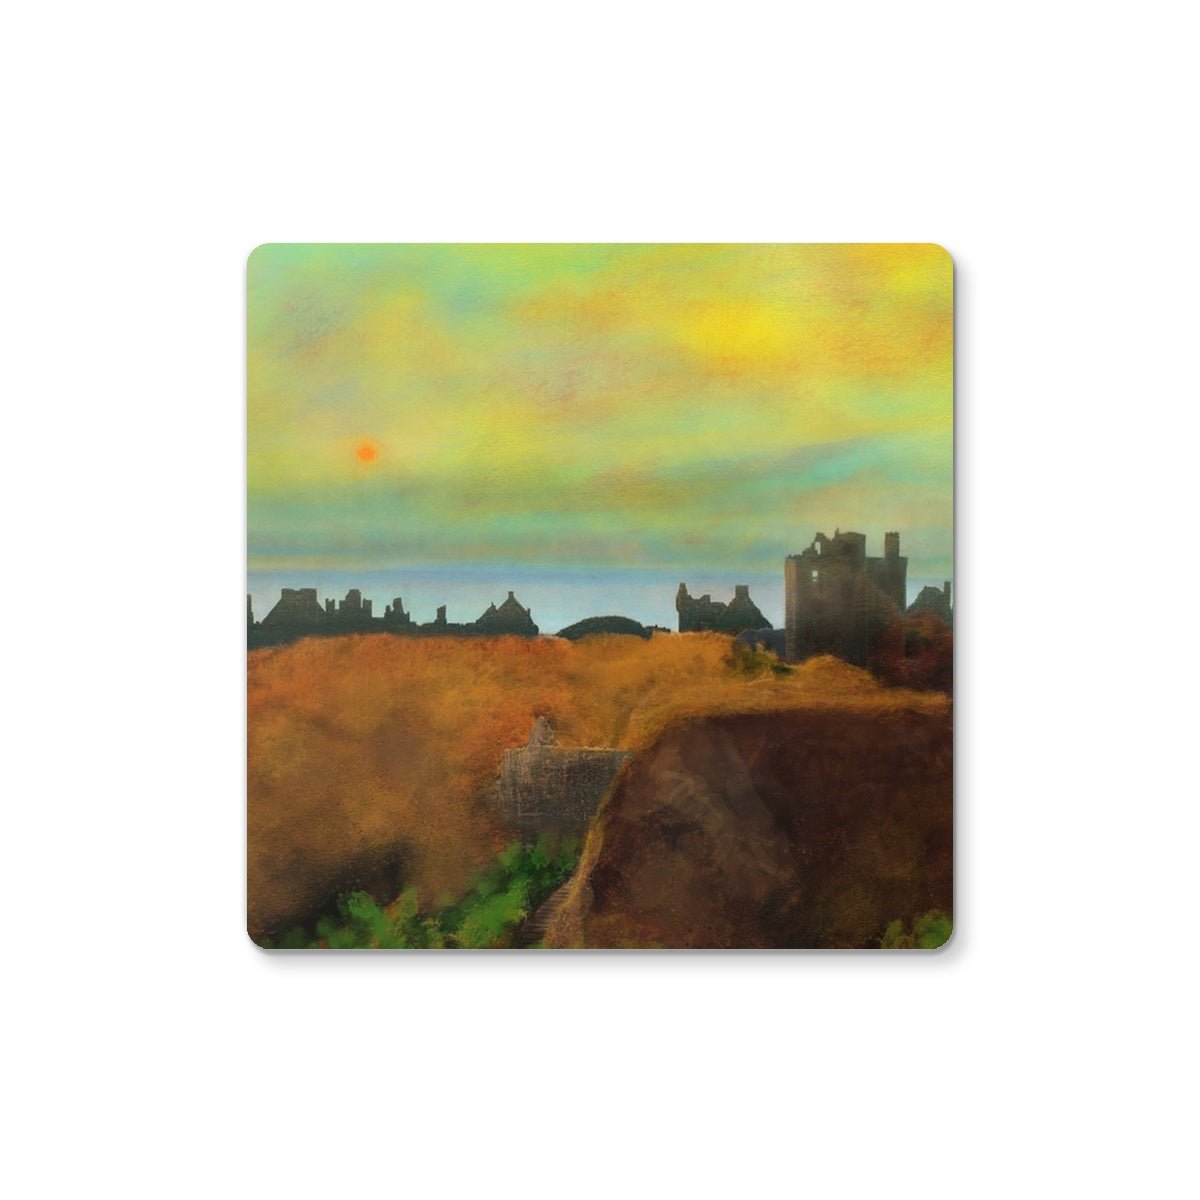 Dunnottar Castle Art Gifts Coaster-Coasters-Scottish Castles Art Gallery-Single Coaster-Paintings, Prints, Homeware, Art Gifts From Scotland By Scottish Artist Kevin Hunter